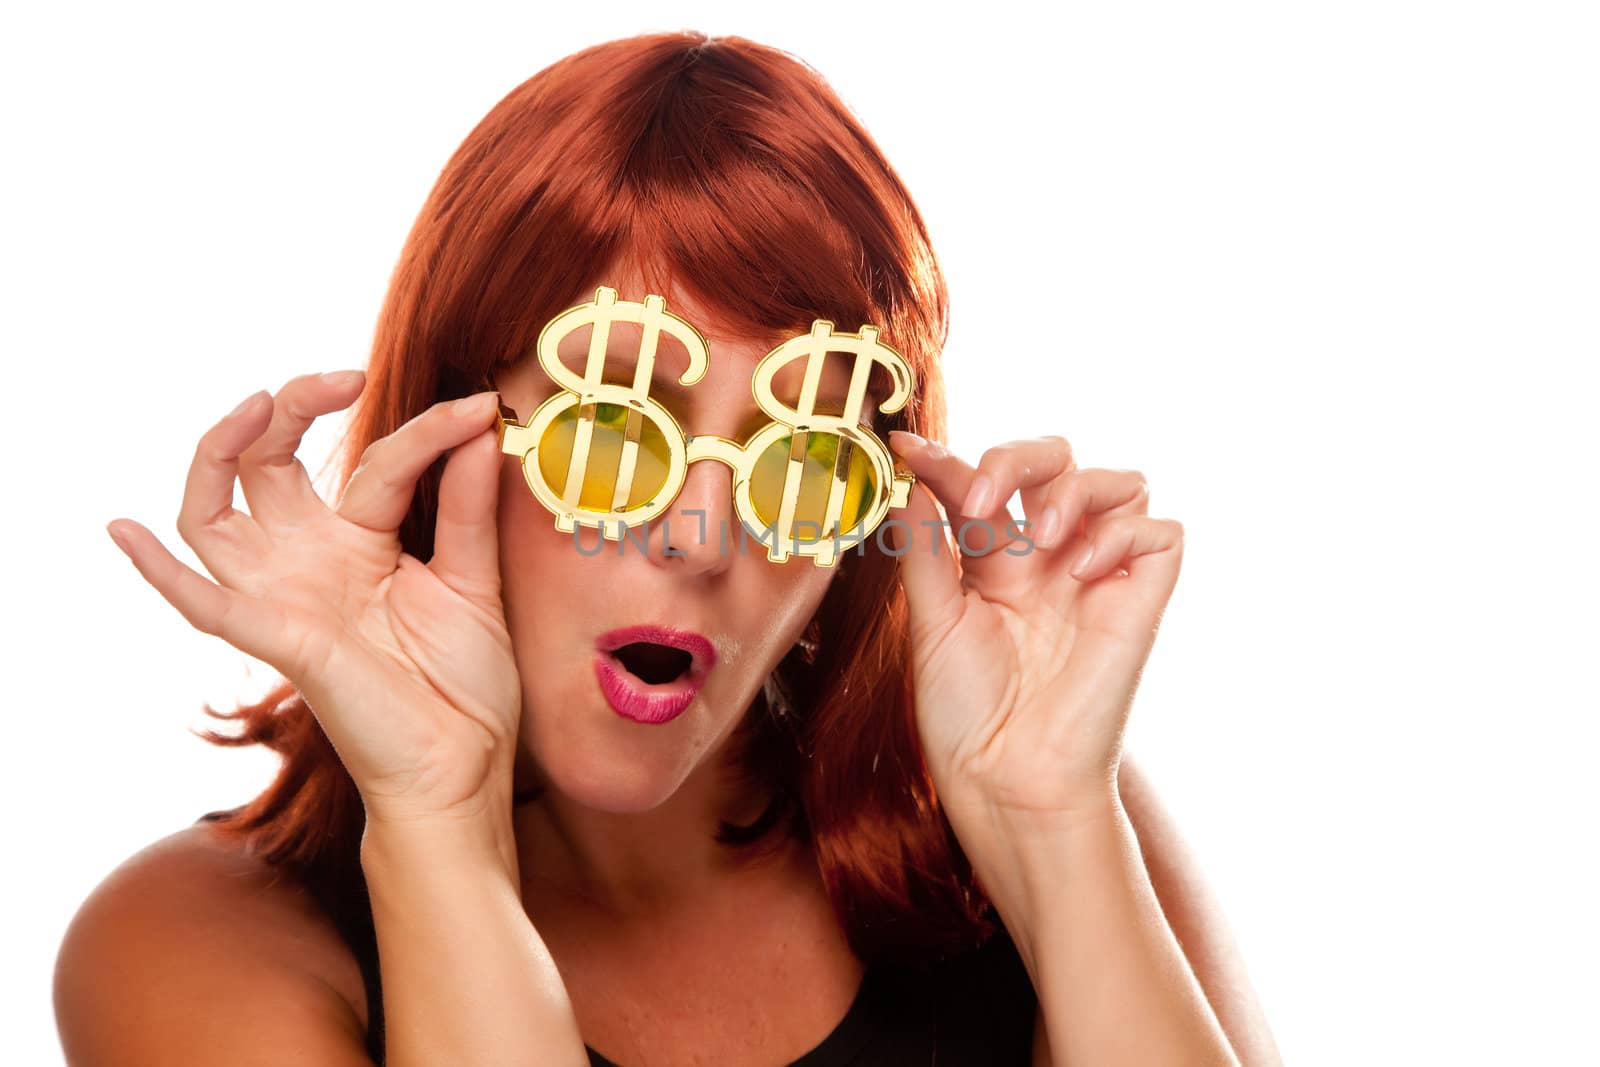 Red Haired Girl with Bling-Bling Dollar Glasses by Feverpitched